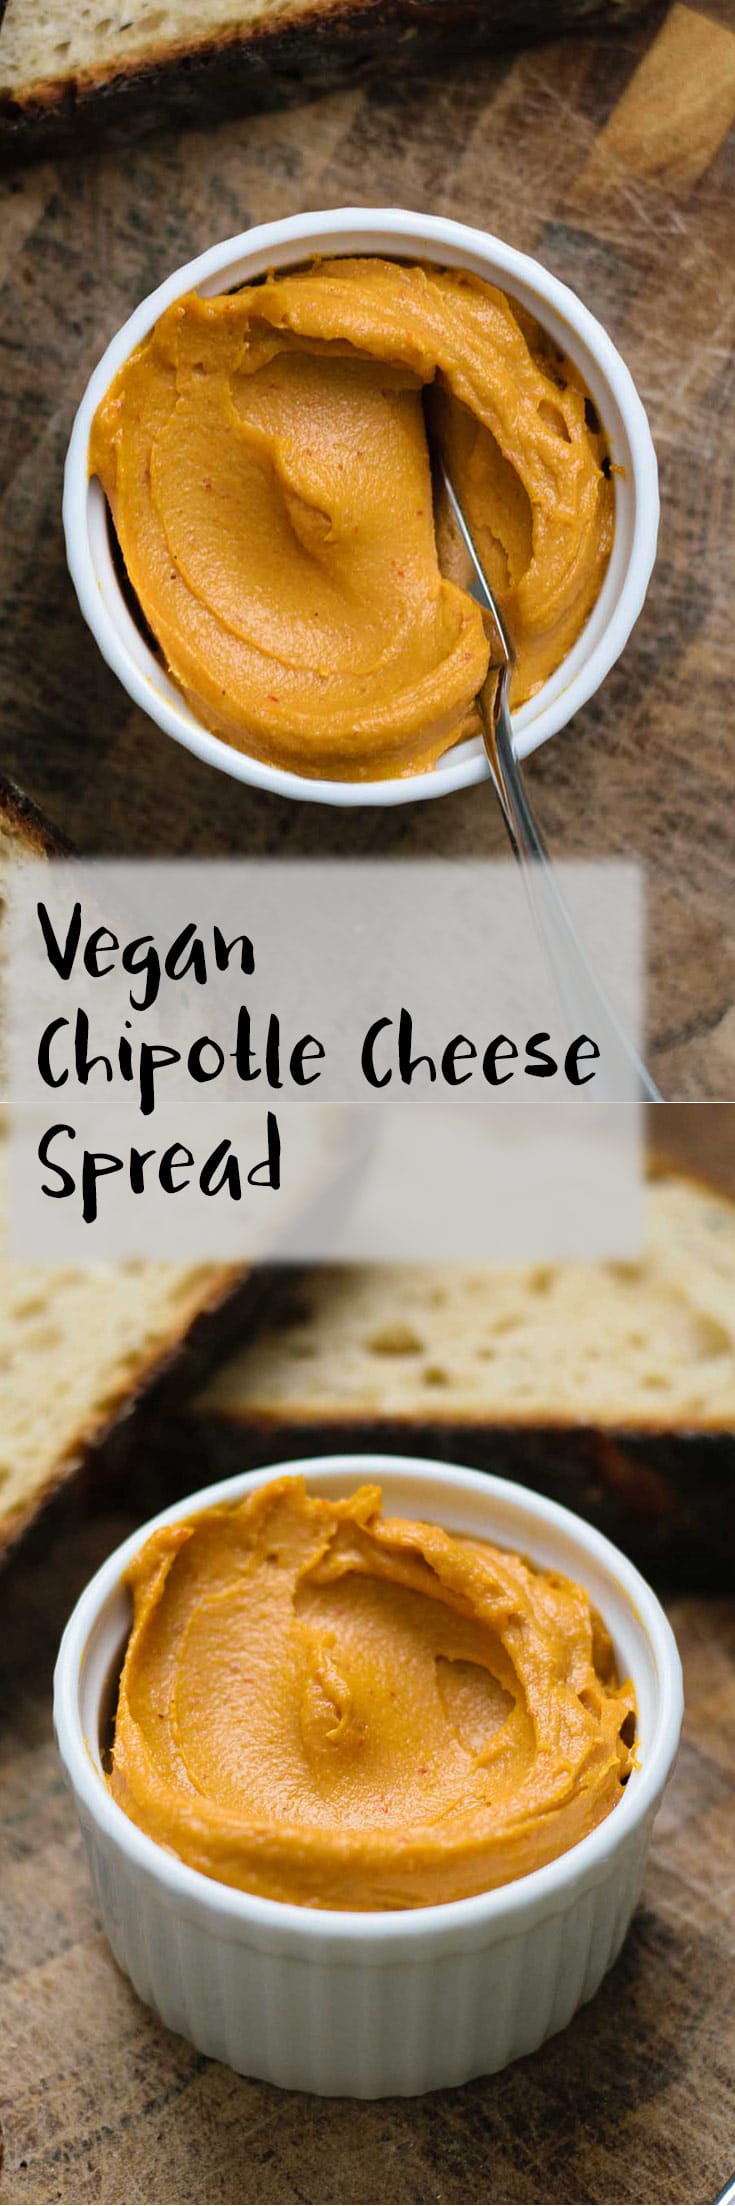 This vegan chipotle cheese spread is a delicious smokey cashew-based and ultra creamy cheese. It's quick and easy to make and is perfect for spreading on toast or crackers! | thecuriouschickpea.com #vegancheese